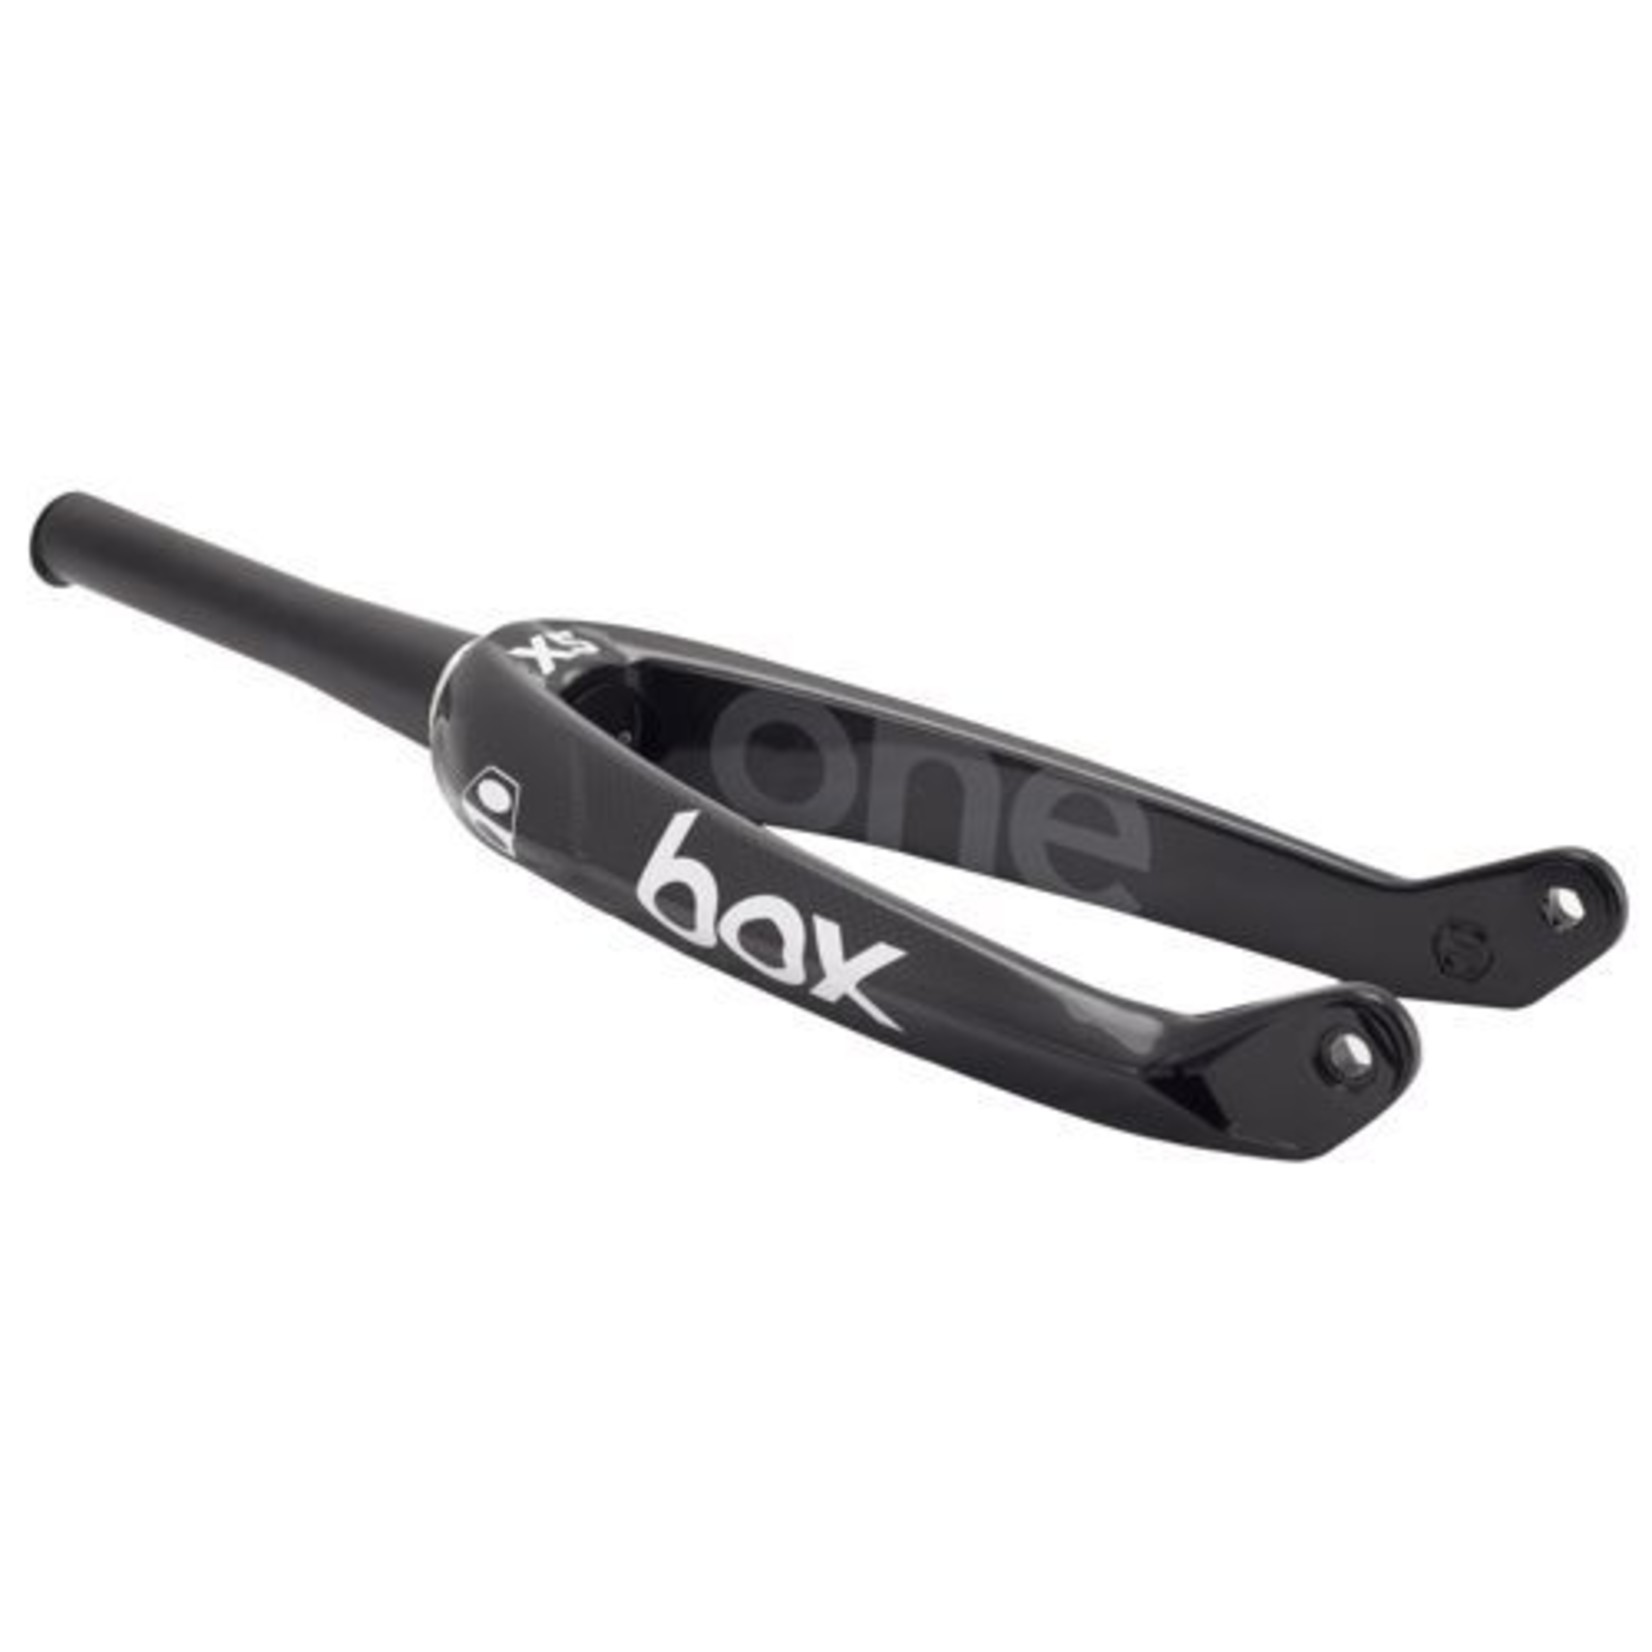 Box Components Box One Pro X5 Carbon Fork 20x20'' - 1.5 to 1 1/8"